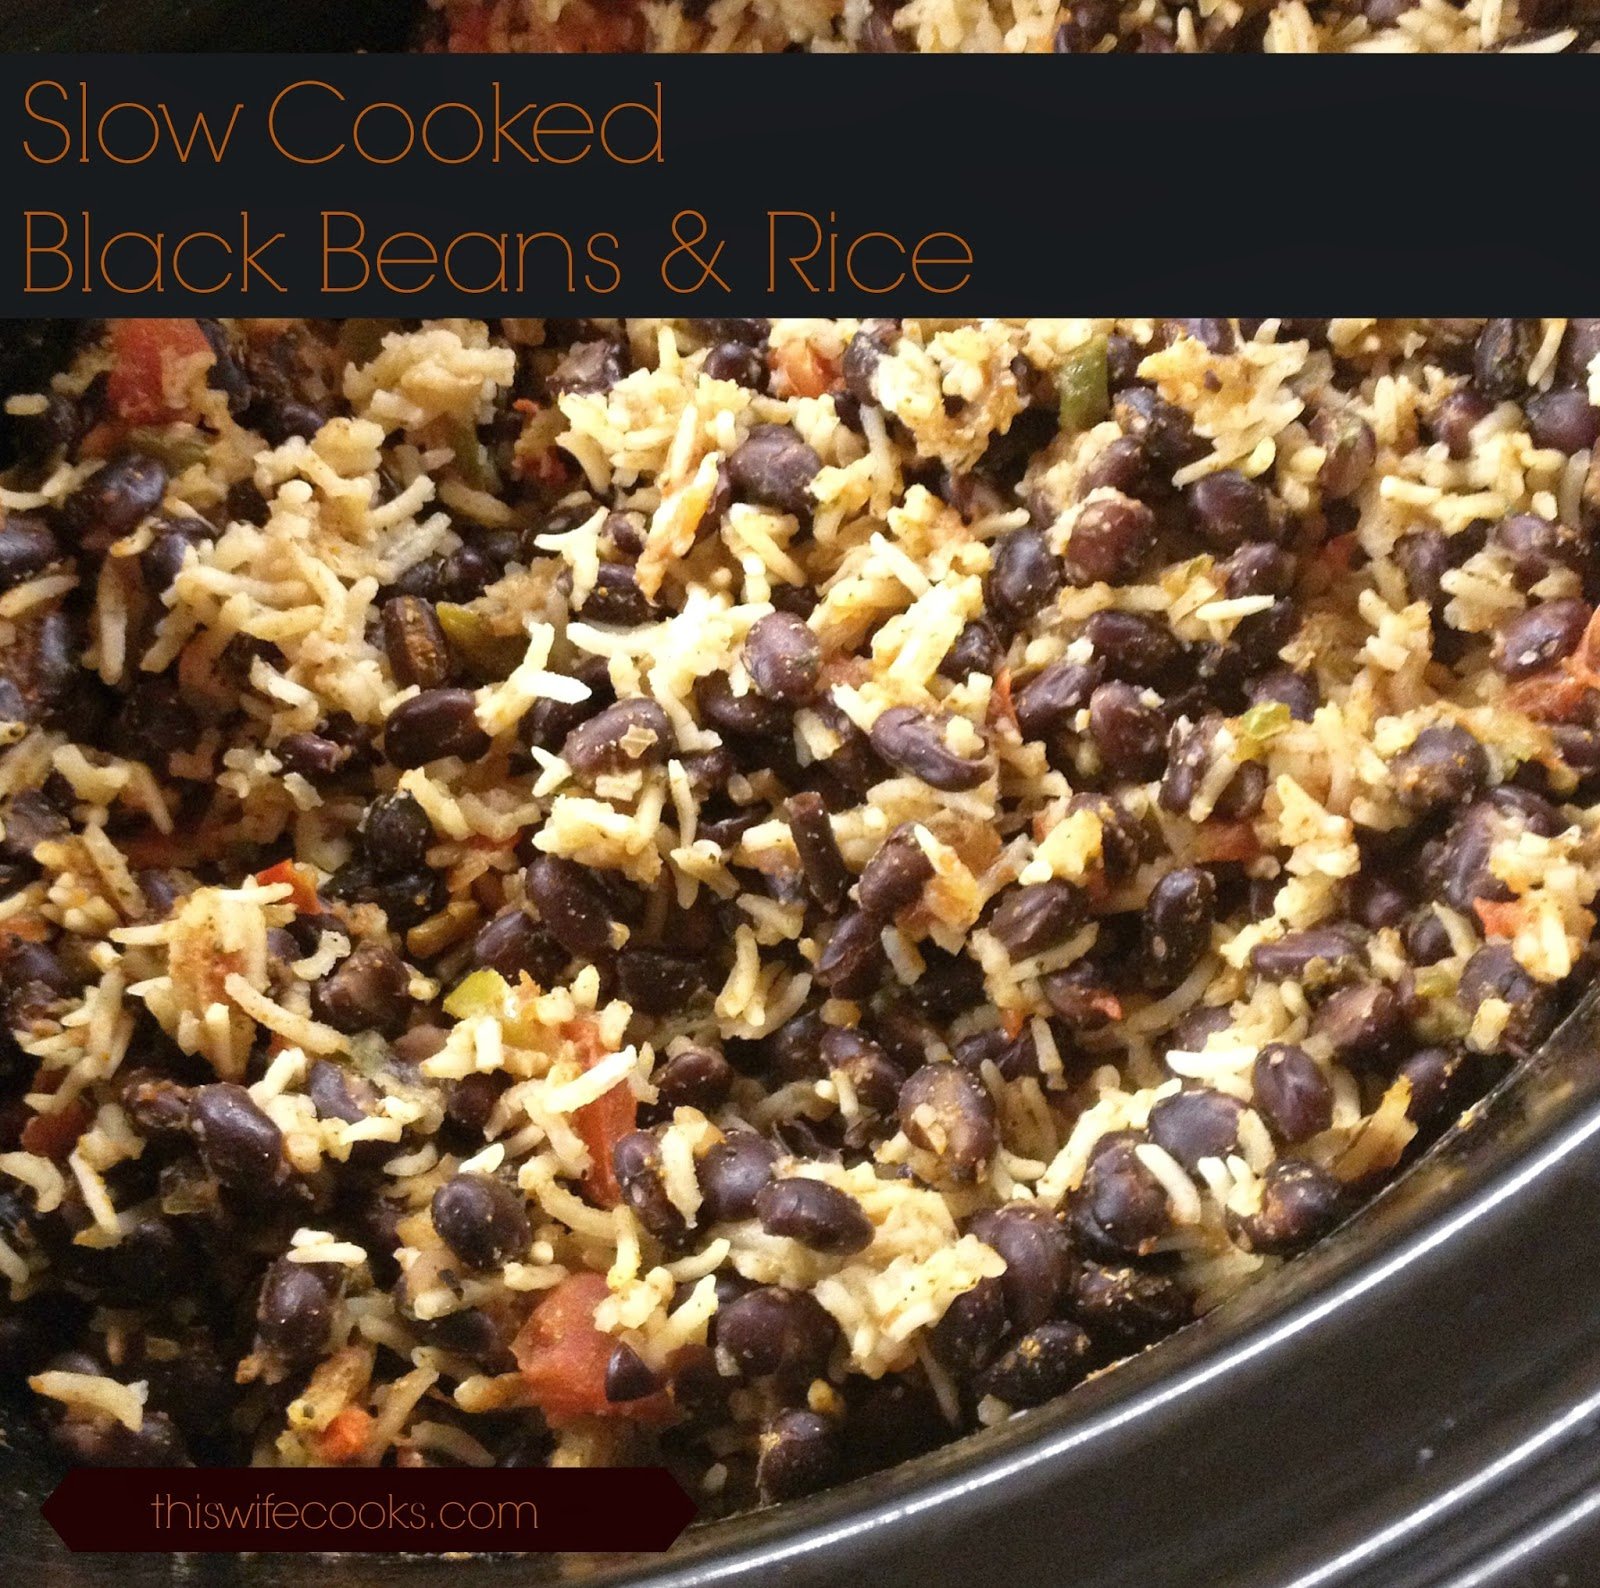 Slow Cooker Black Beans & Rice - Ready to serve in just 3 hours!